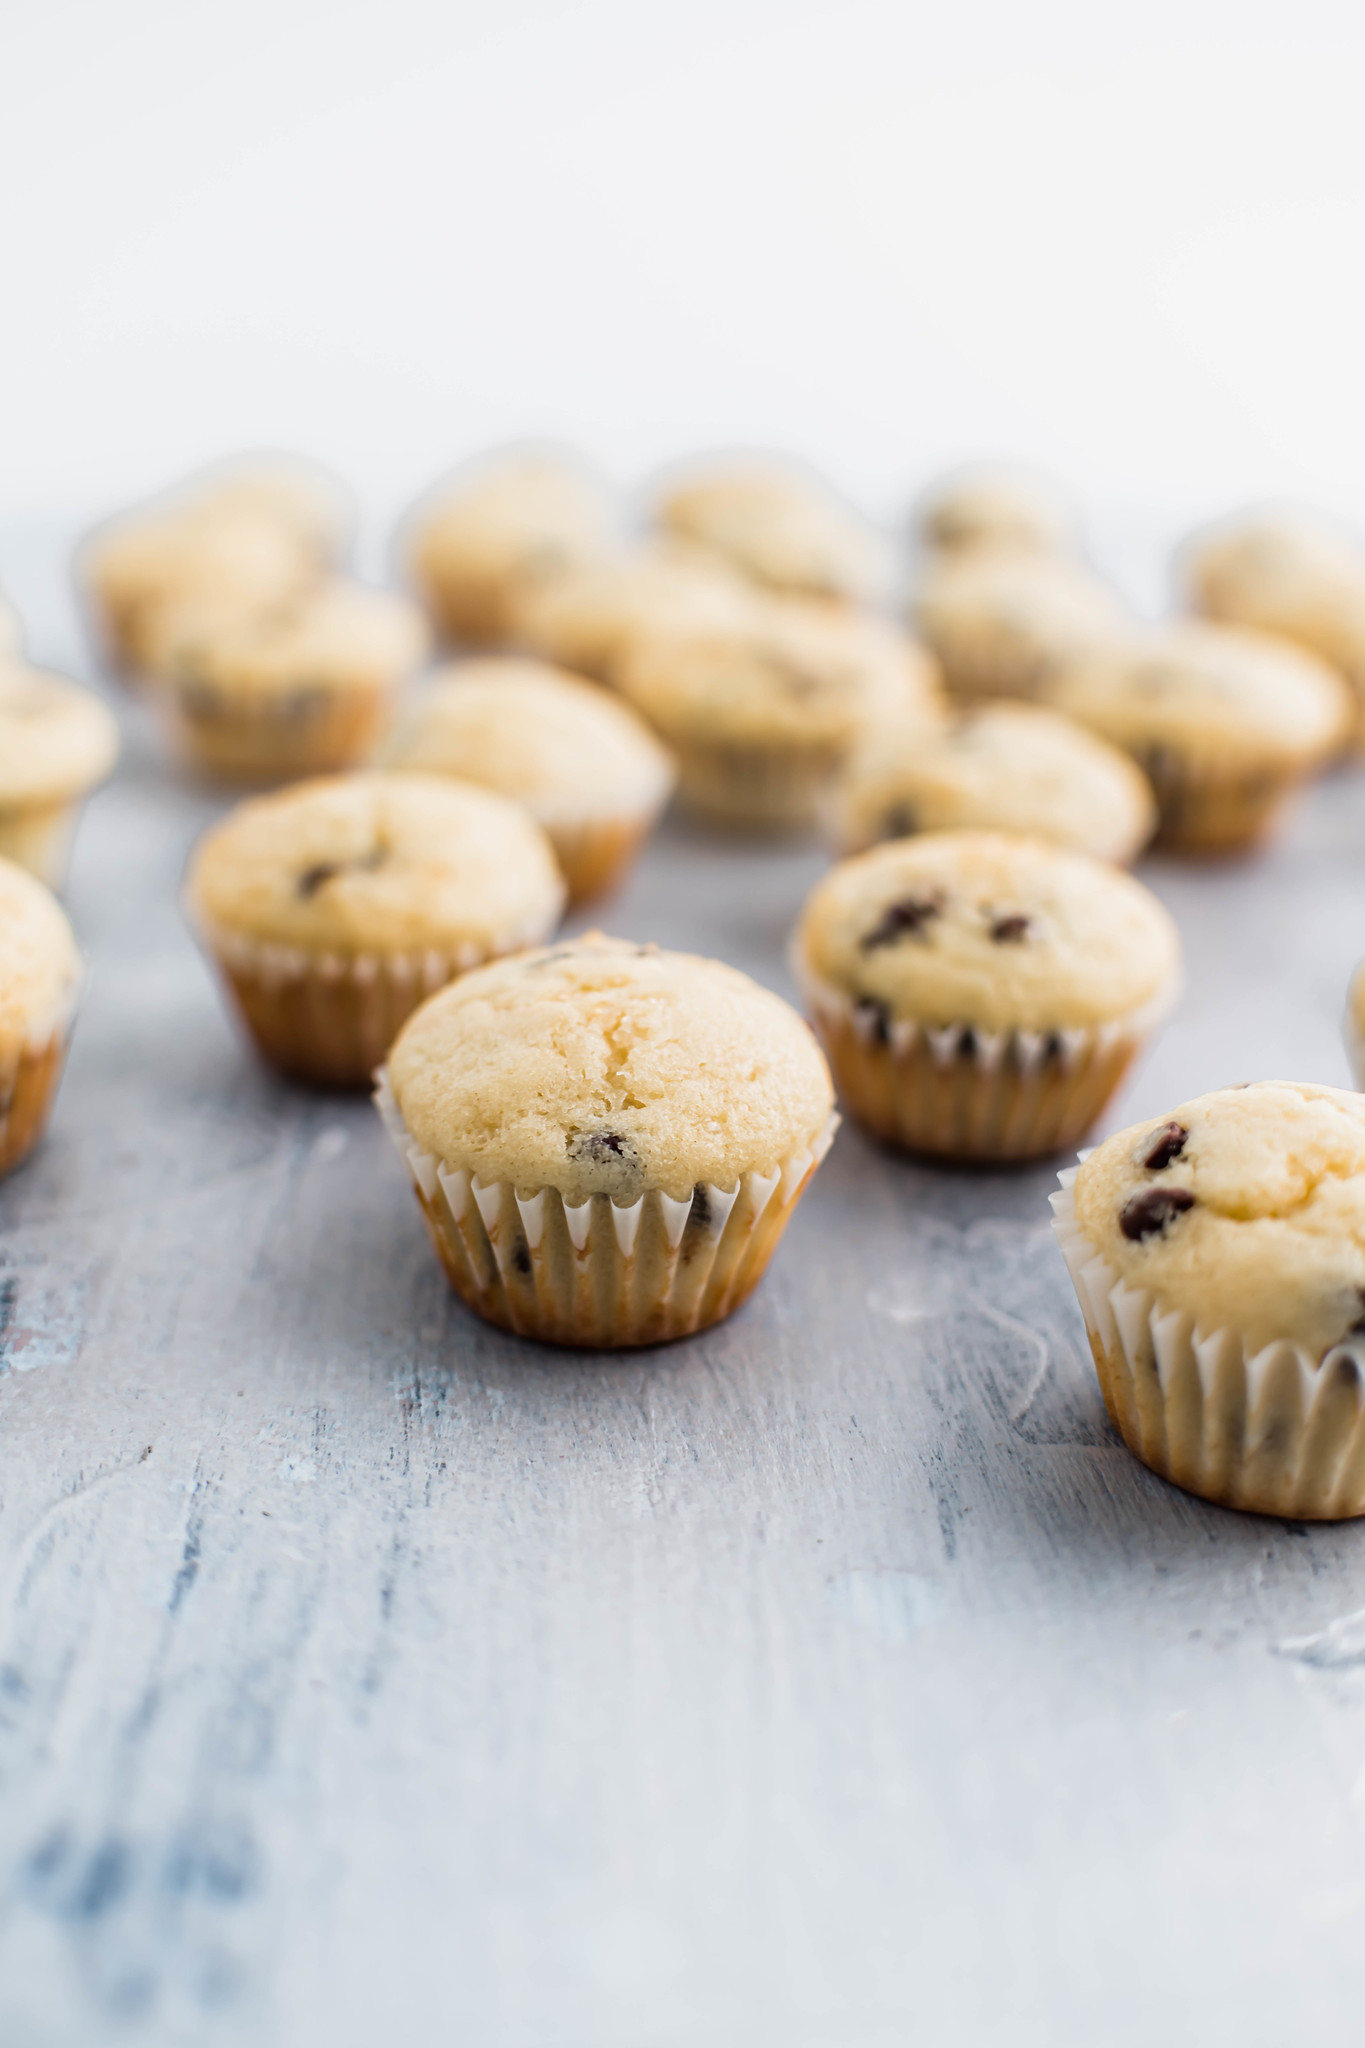 Mini chocolate chip muffins scattered along a gray blue surface.